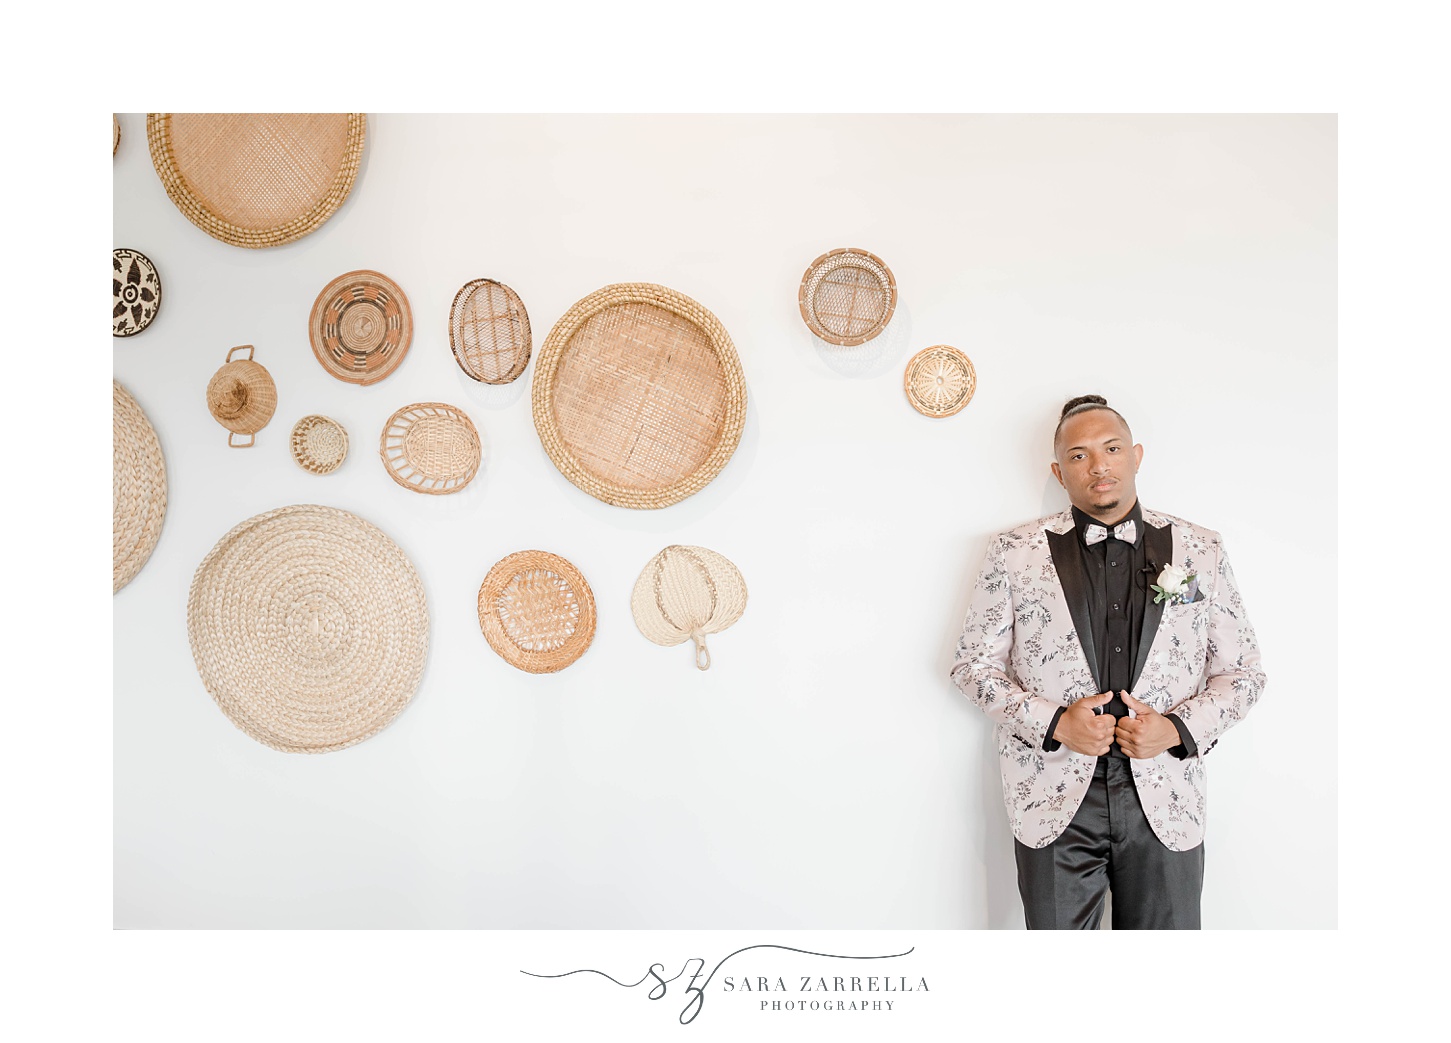 groom poses by woven basket display at Newport Beach House